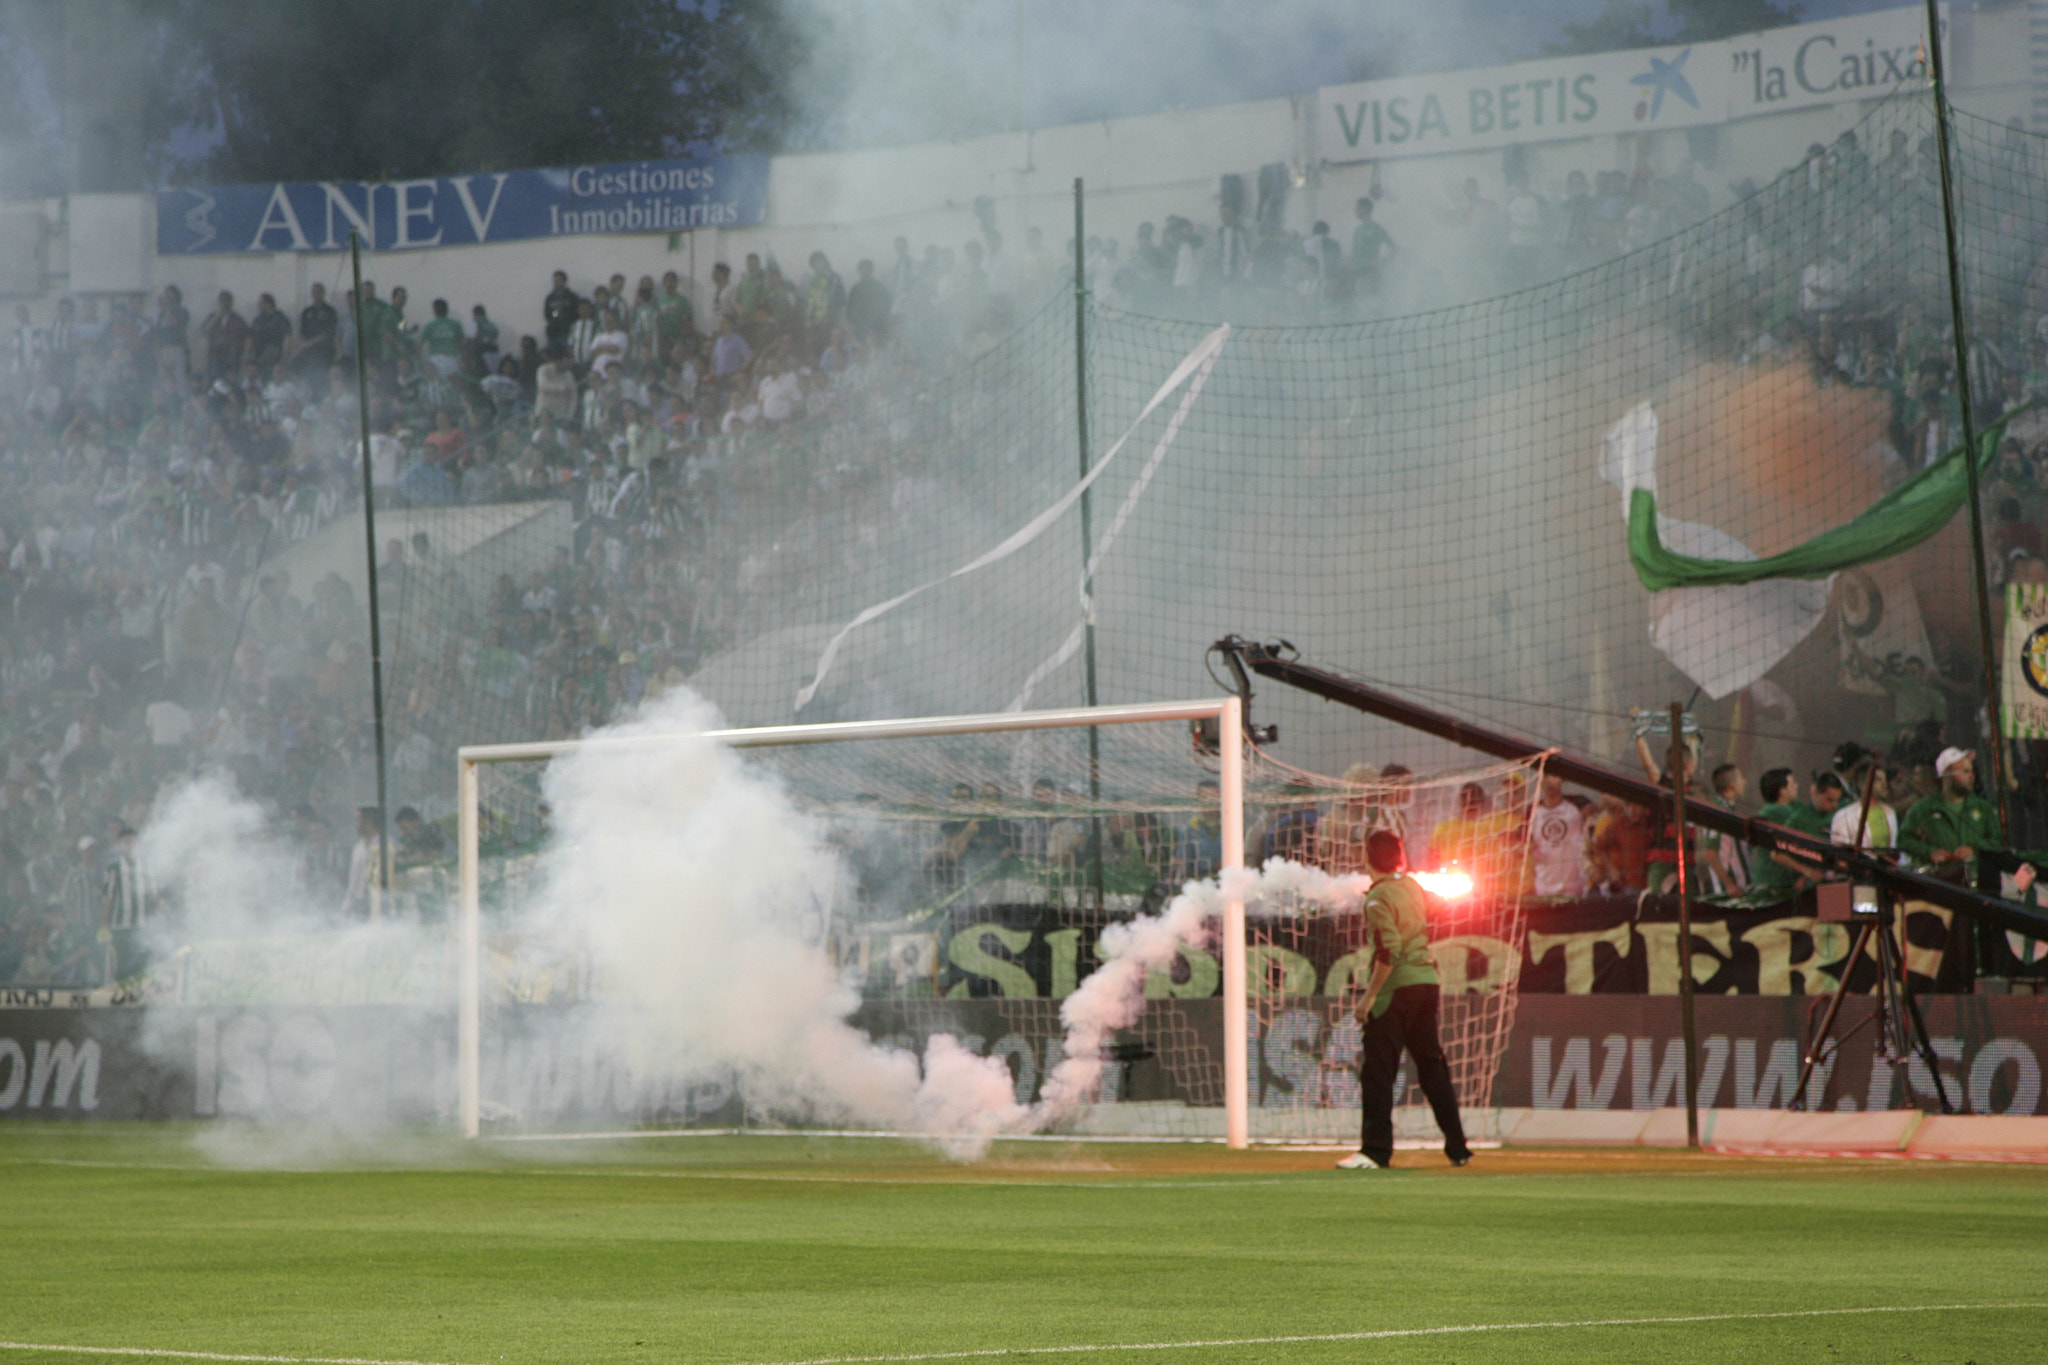 Real Betis fans firing flares. Taken during the local derby between Real Betis Balompie and Sevilla